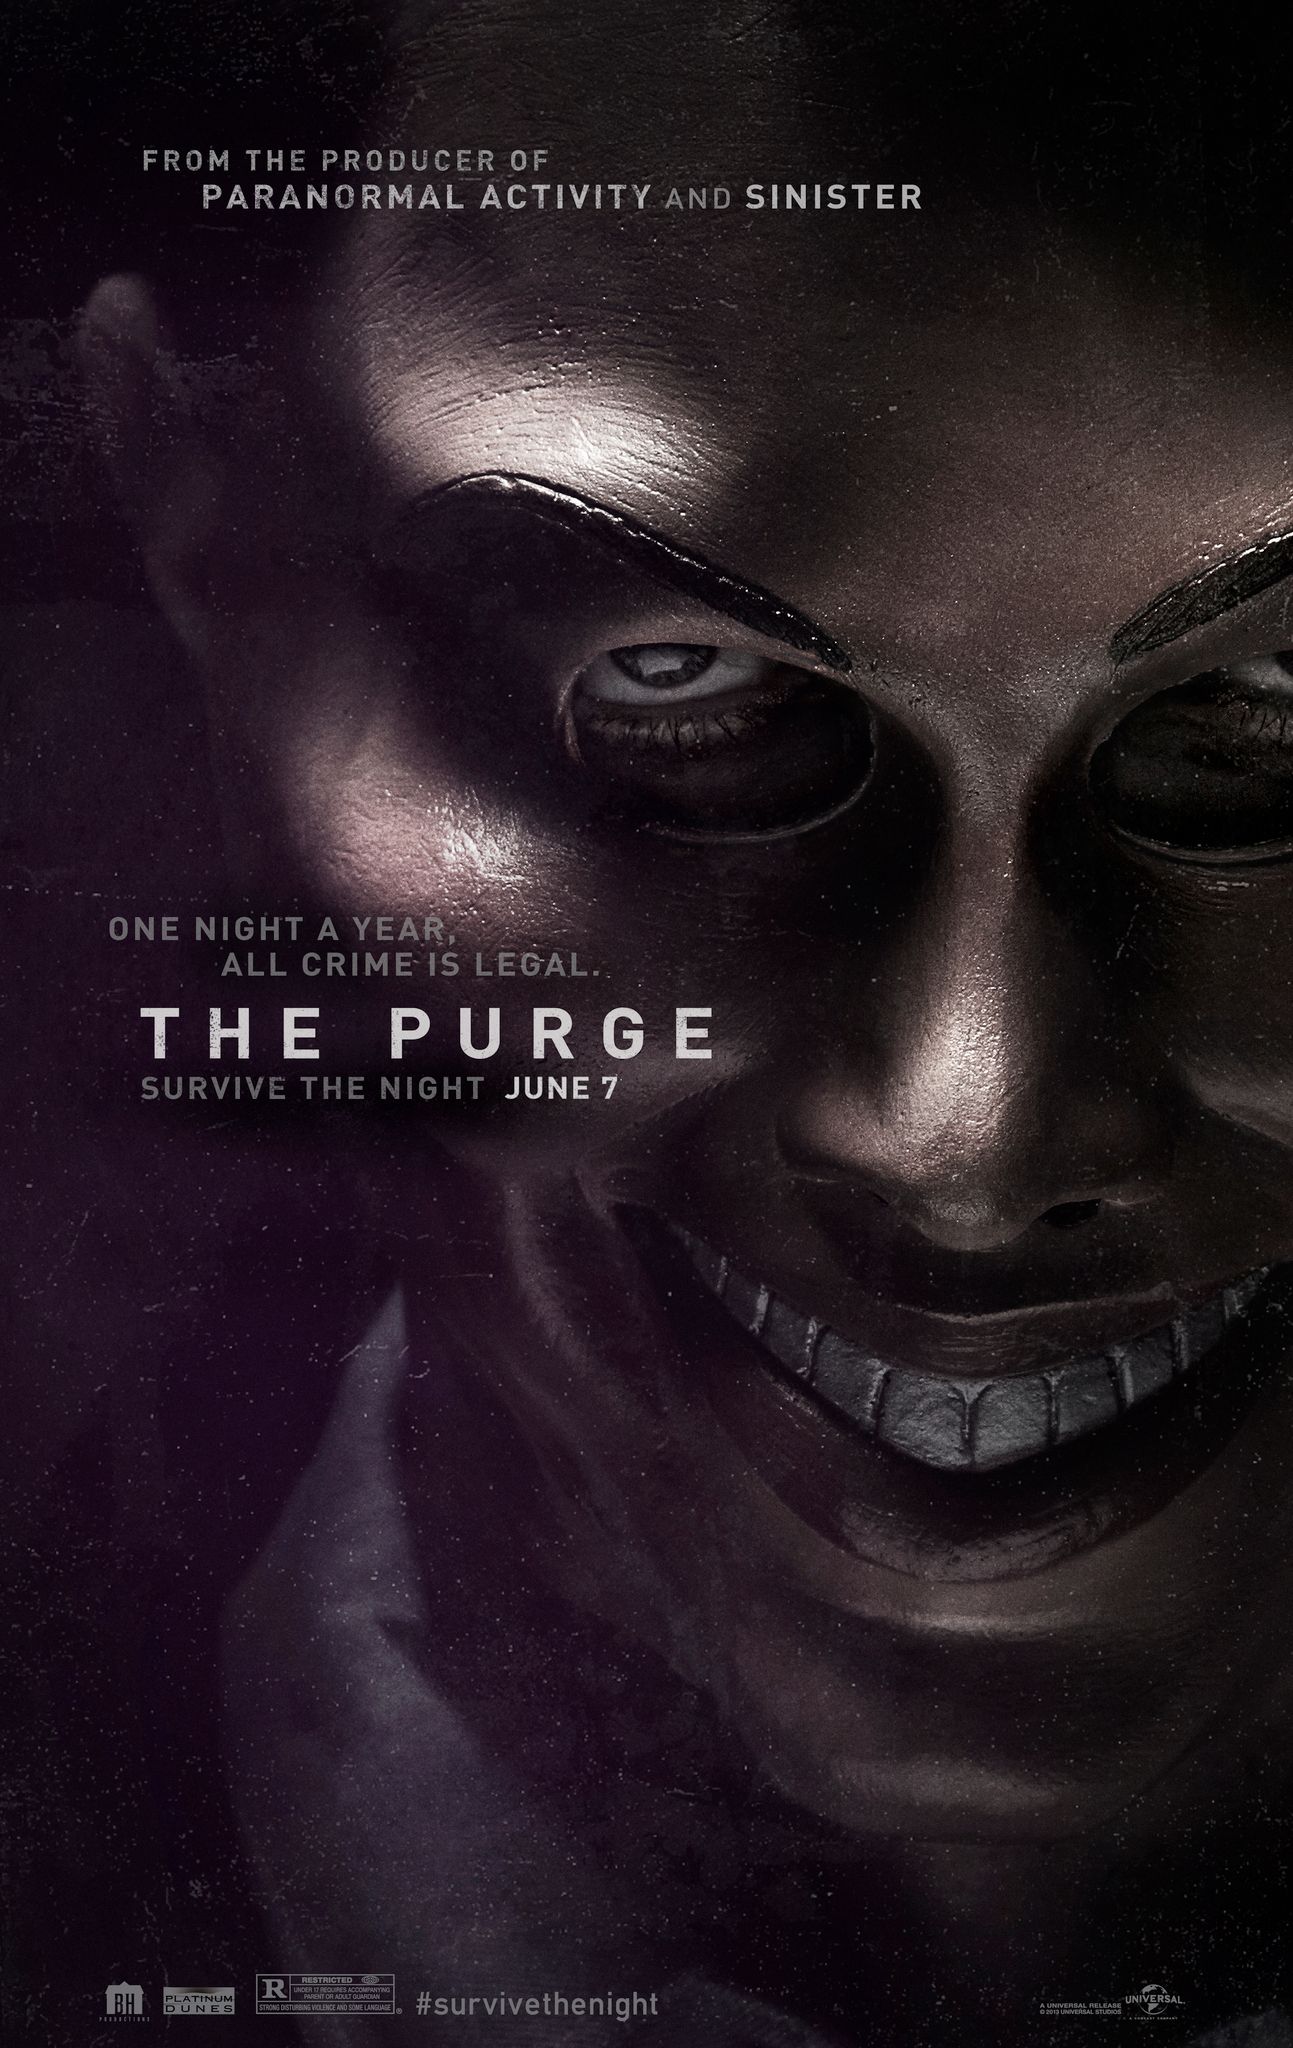 The Purge Film Poster